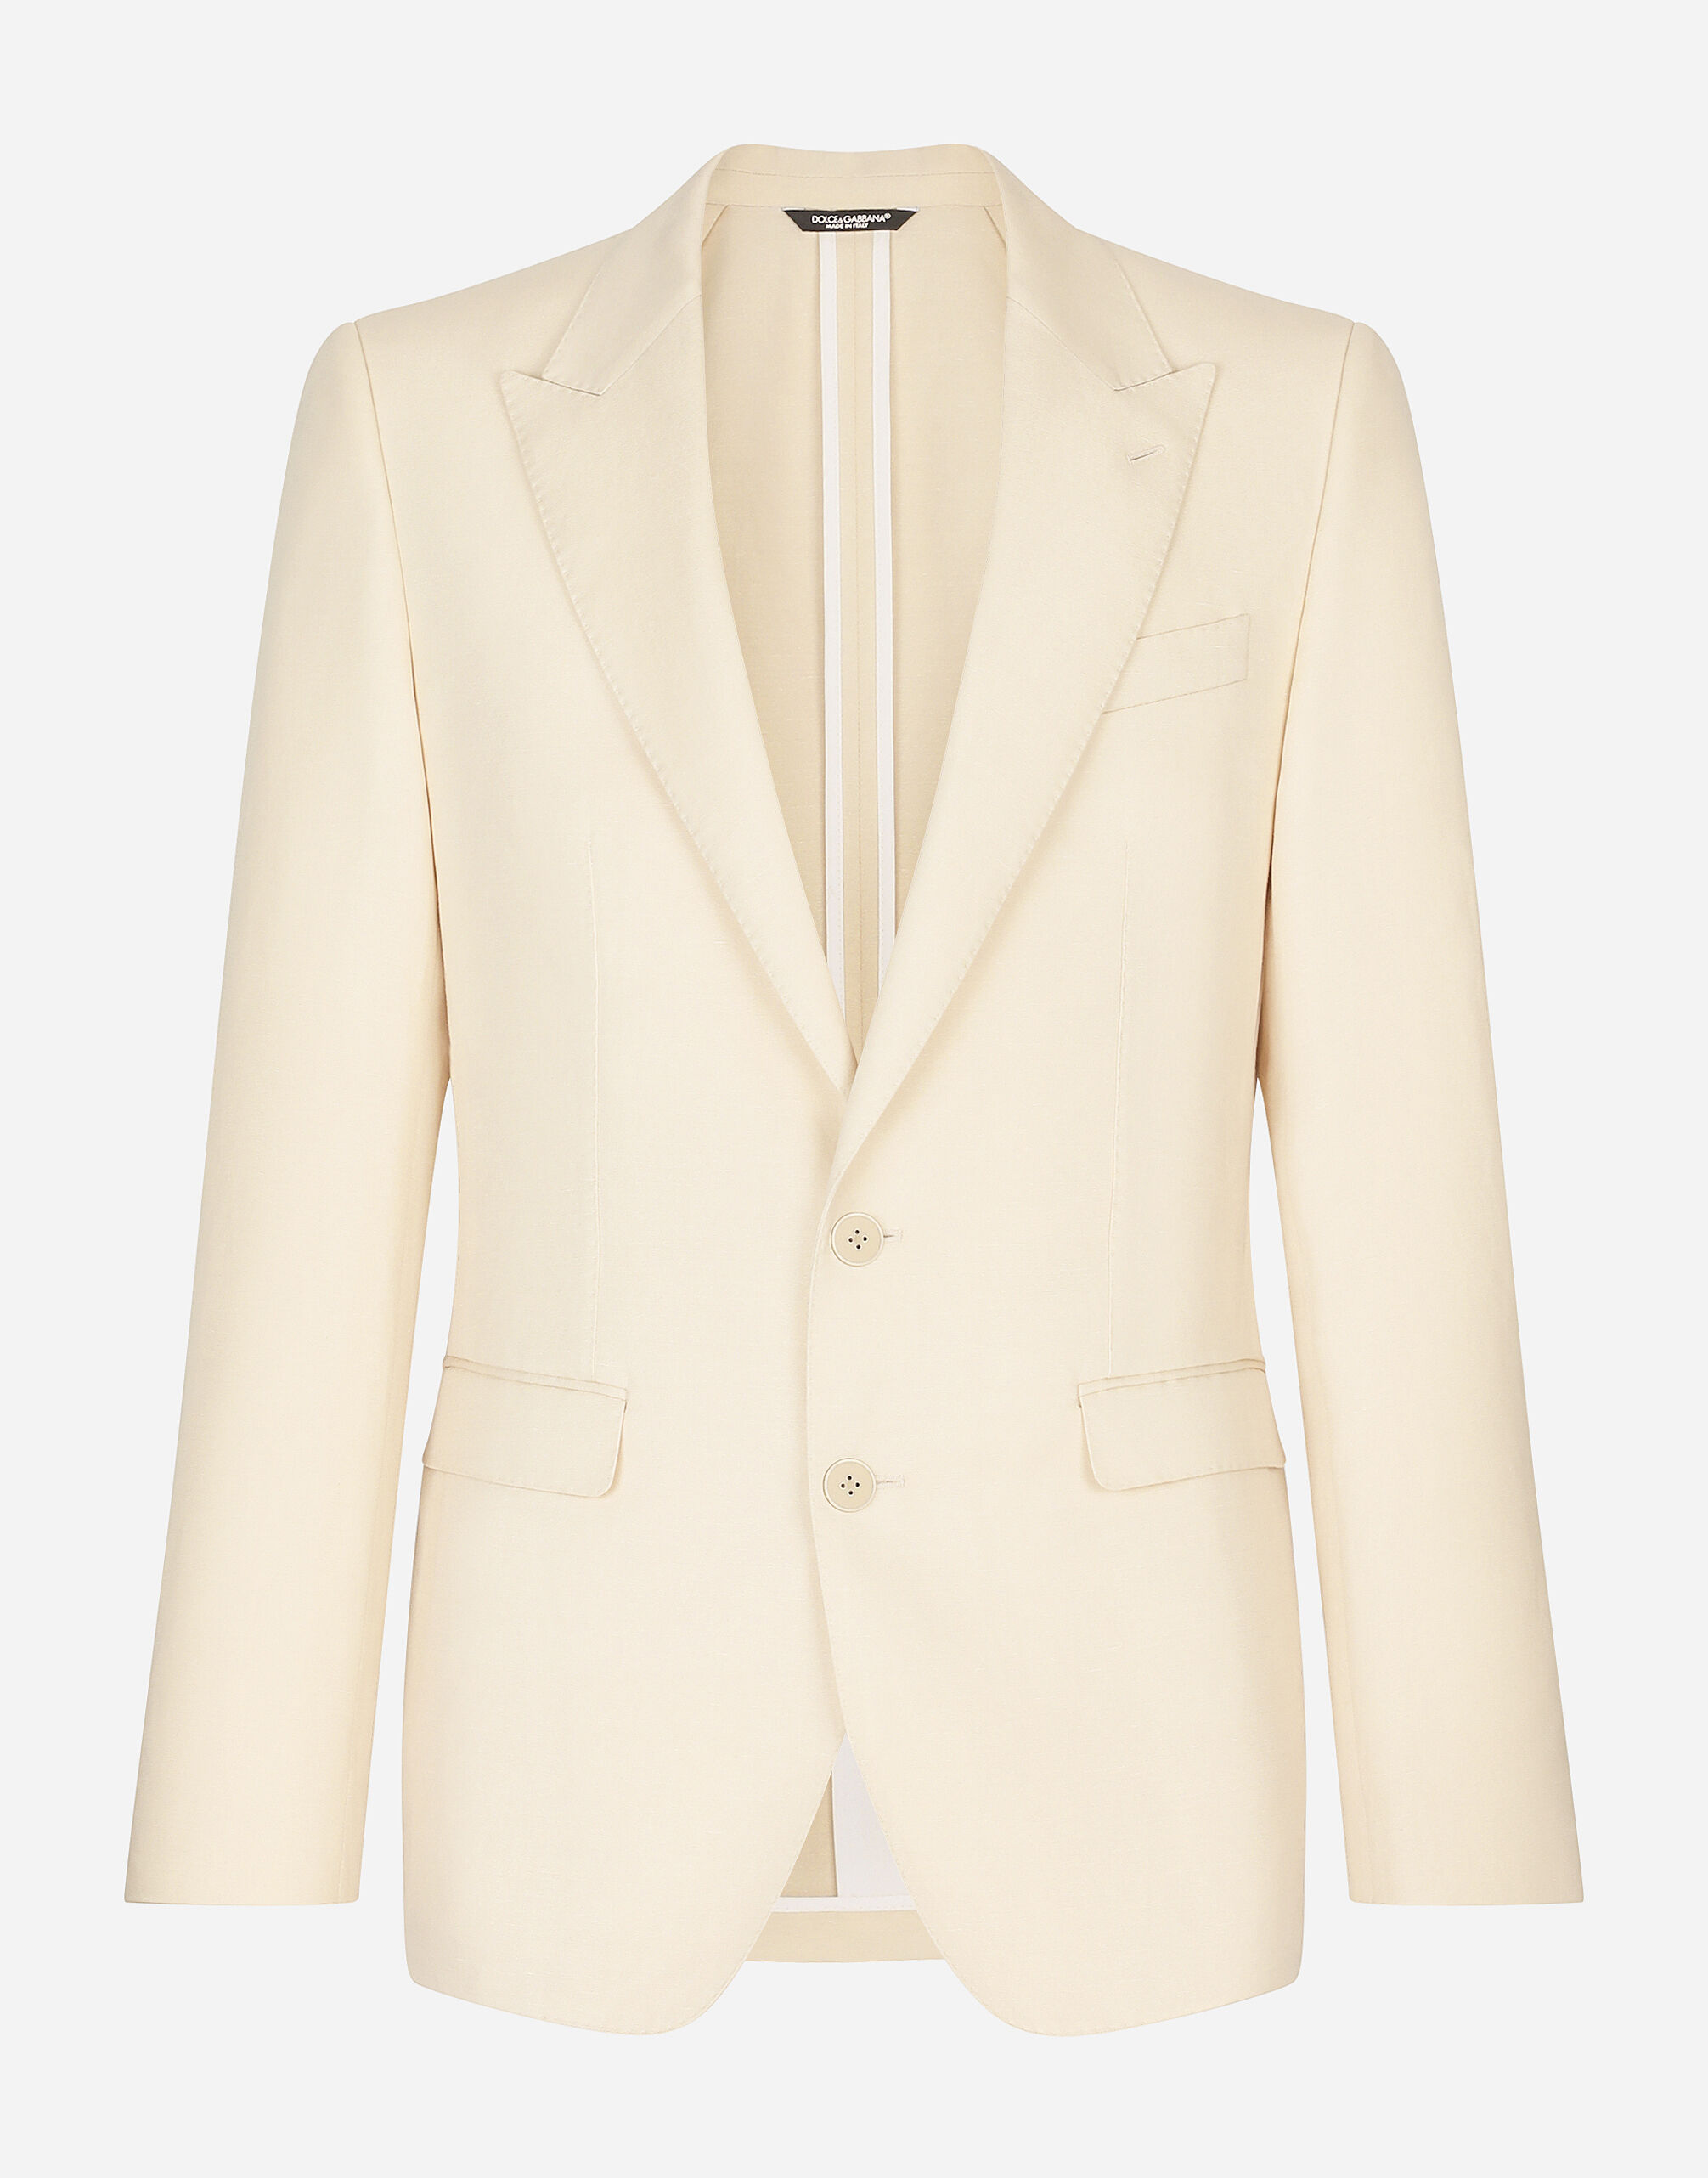 Dolce & Gabbana Single-breasted Taormina jacket in linen, cotton and silk Multicolor G5LY0DG8LA5